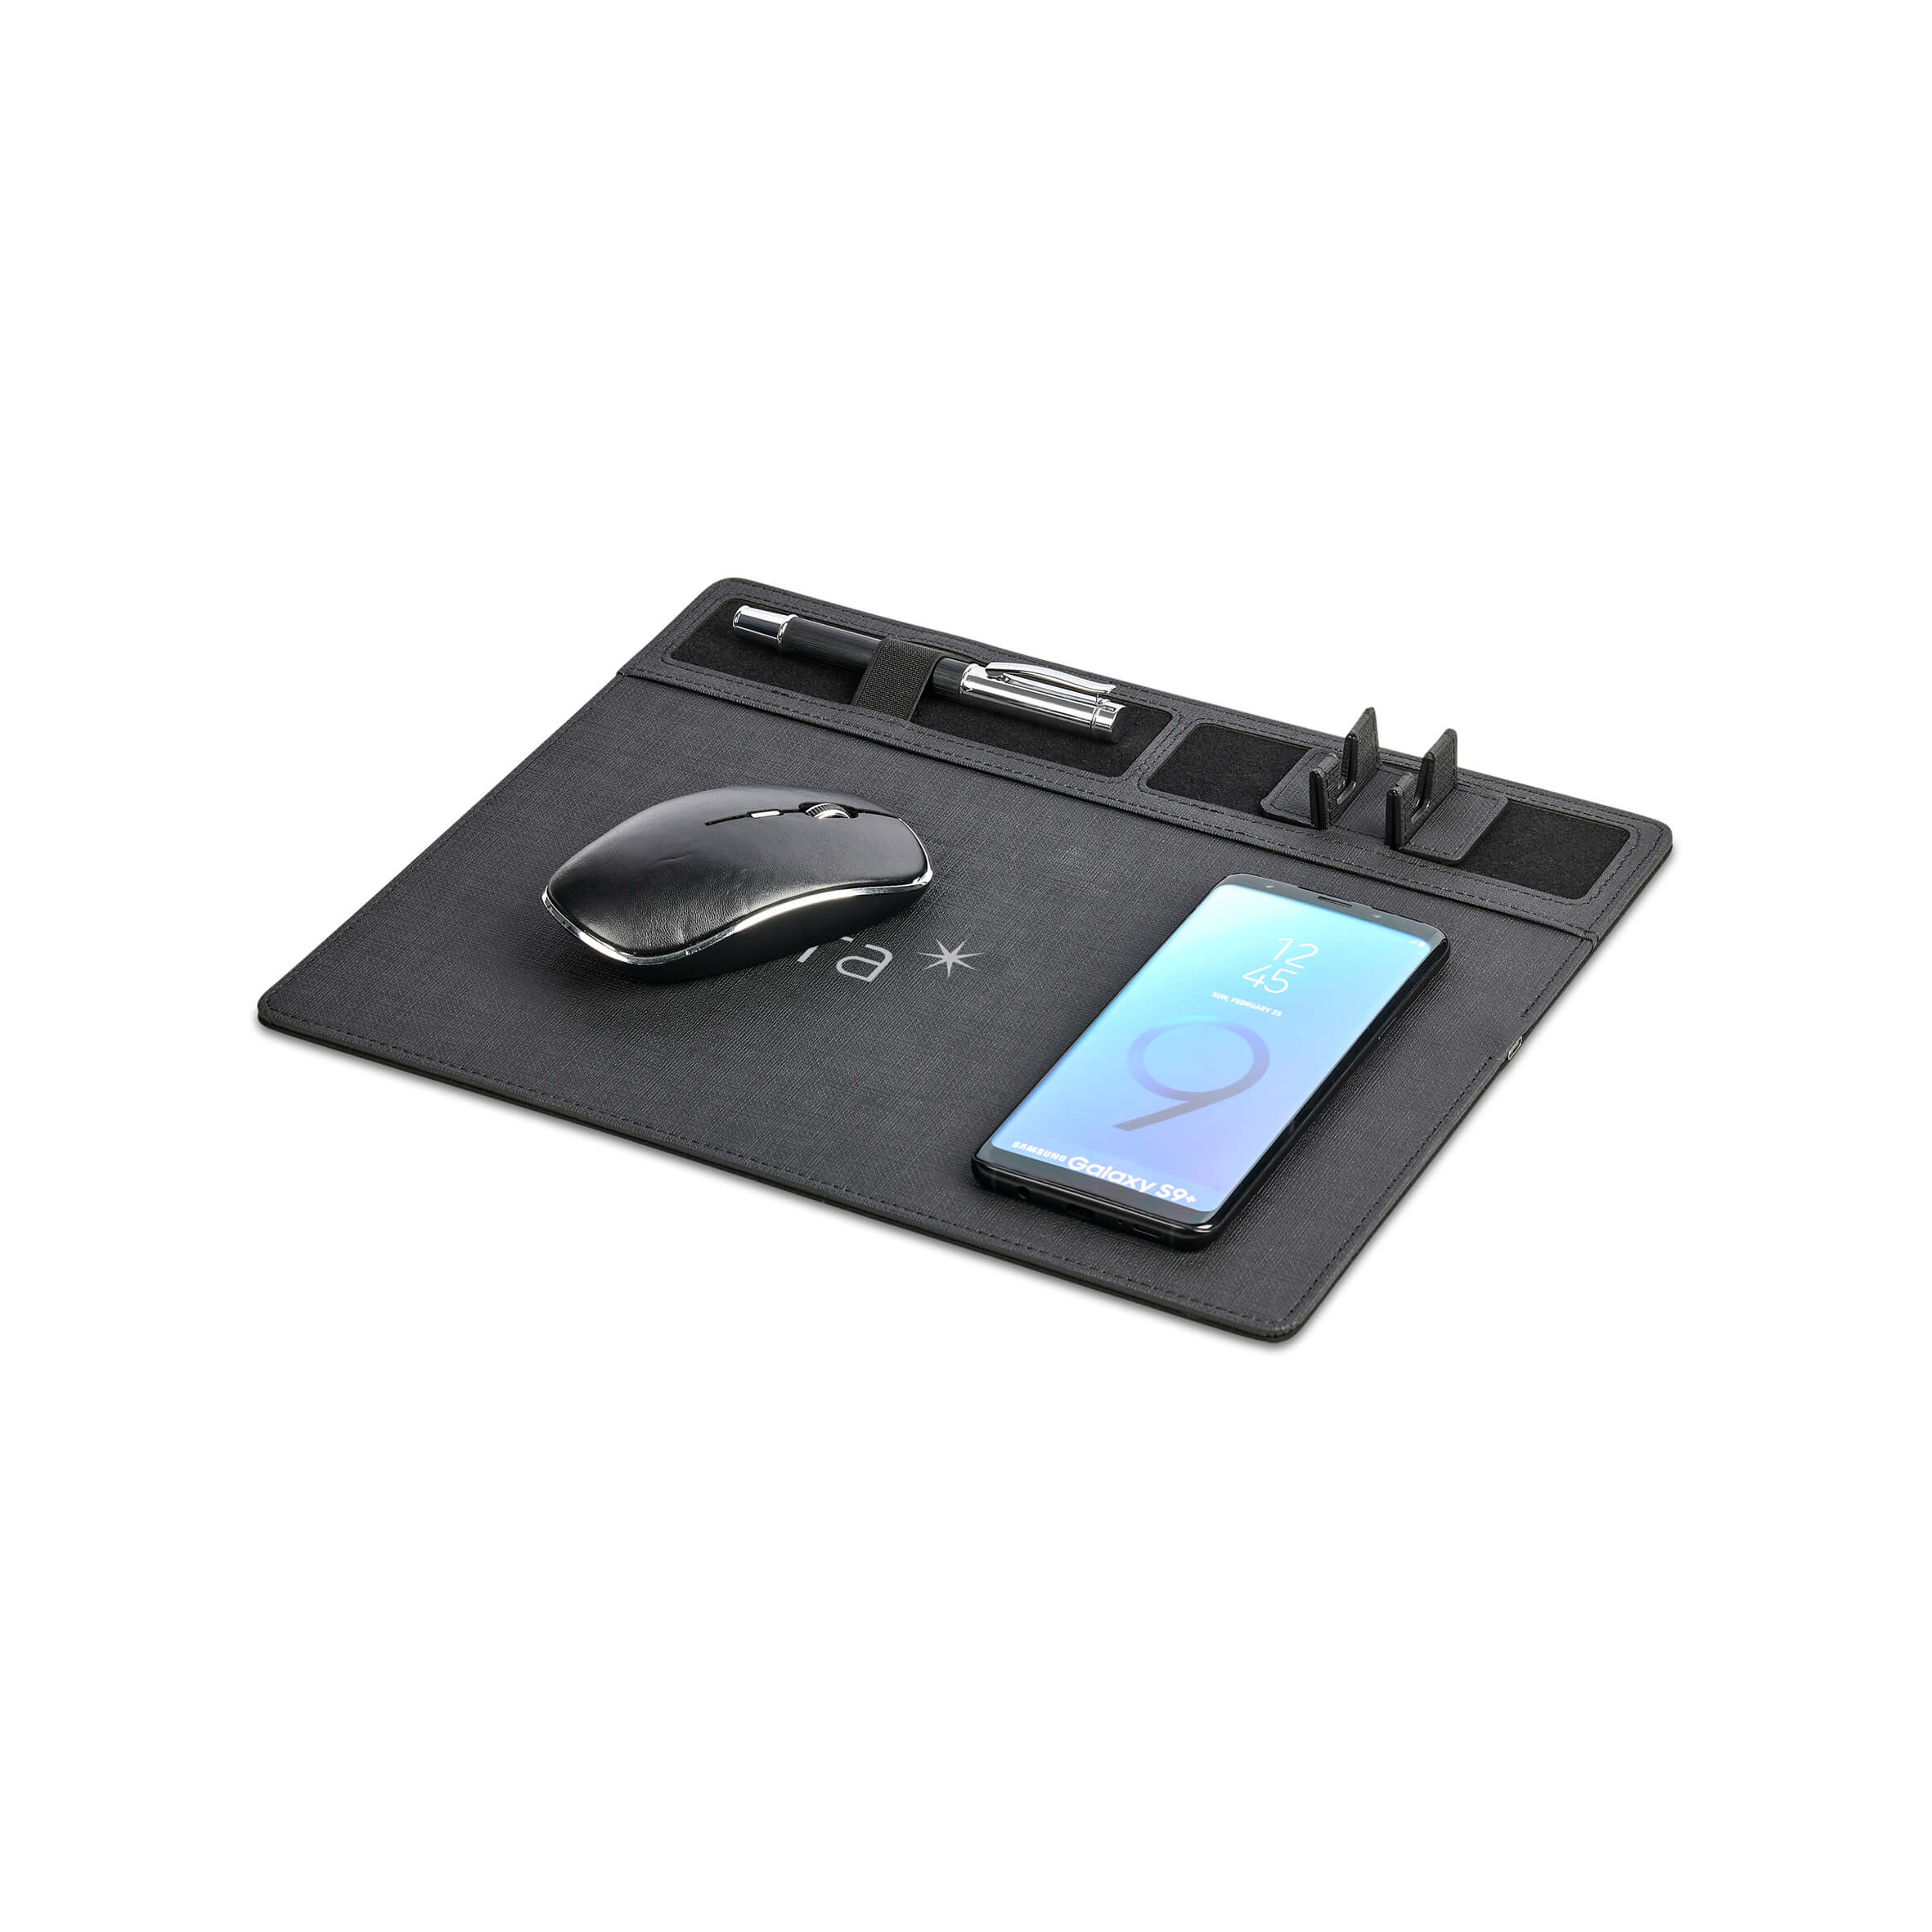 Alex Varga Aramis Wireless Charger Desk Organiser Items launched in 2023